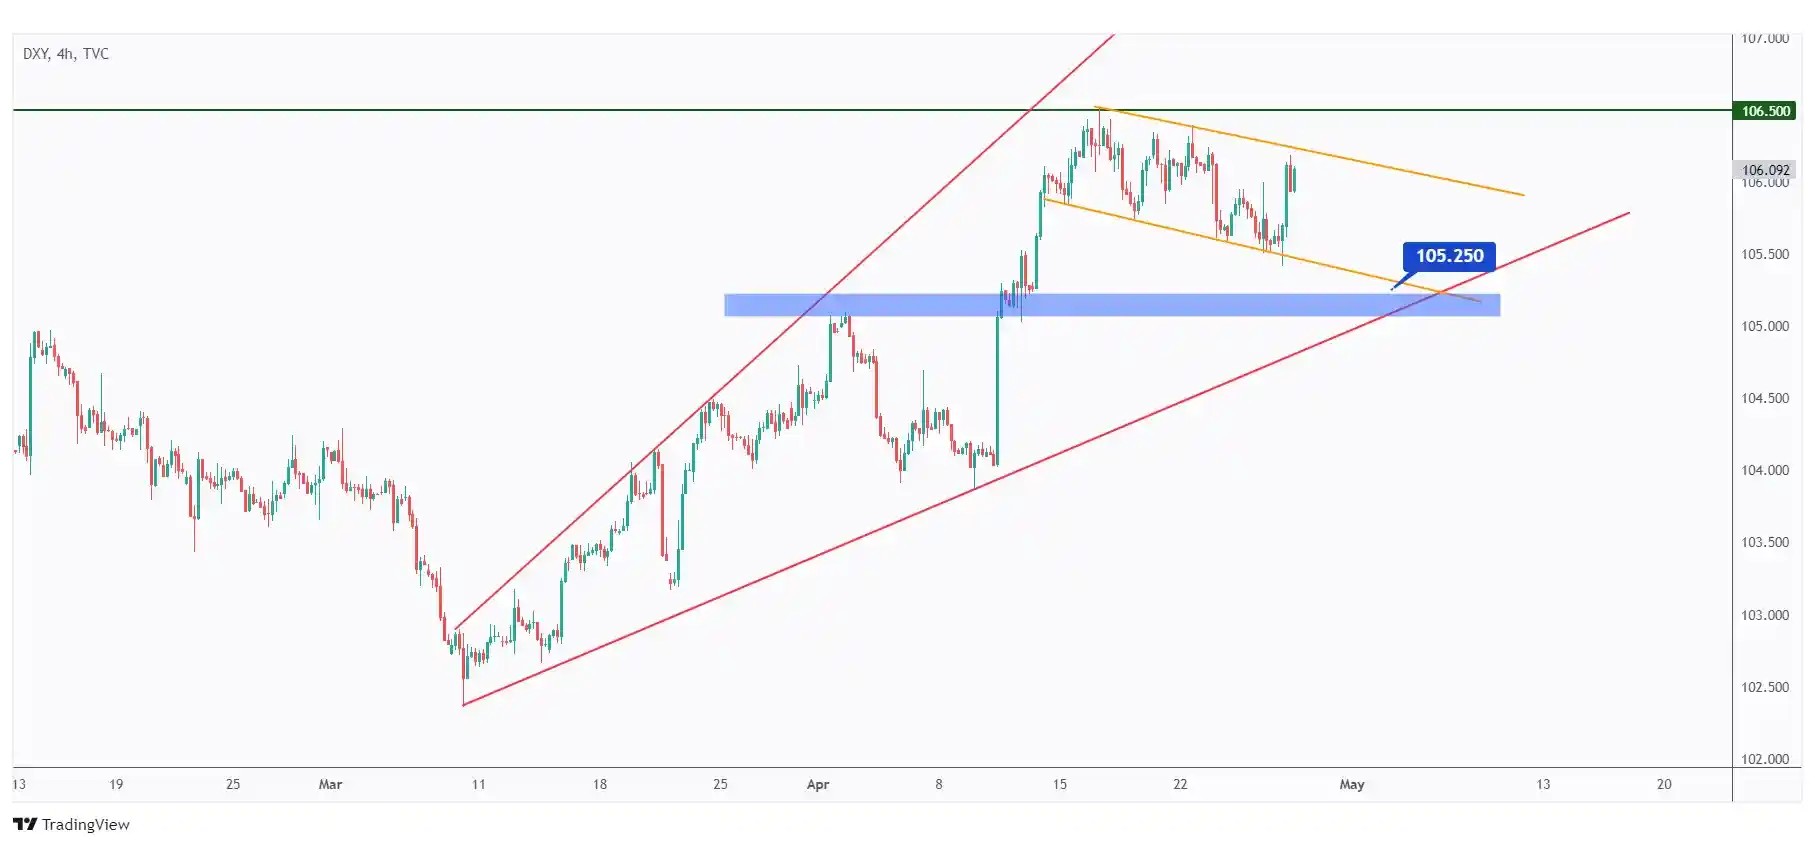 DXY 4h overall bearish trading within the falling channel and approaching a support zone at $105.25.